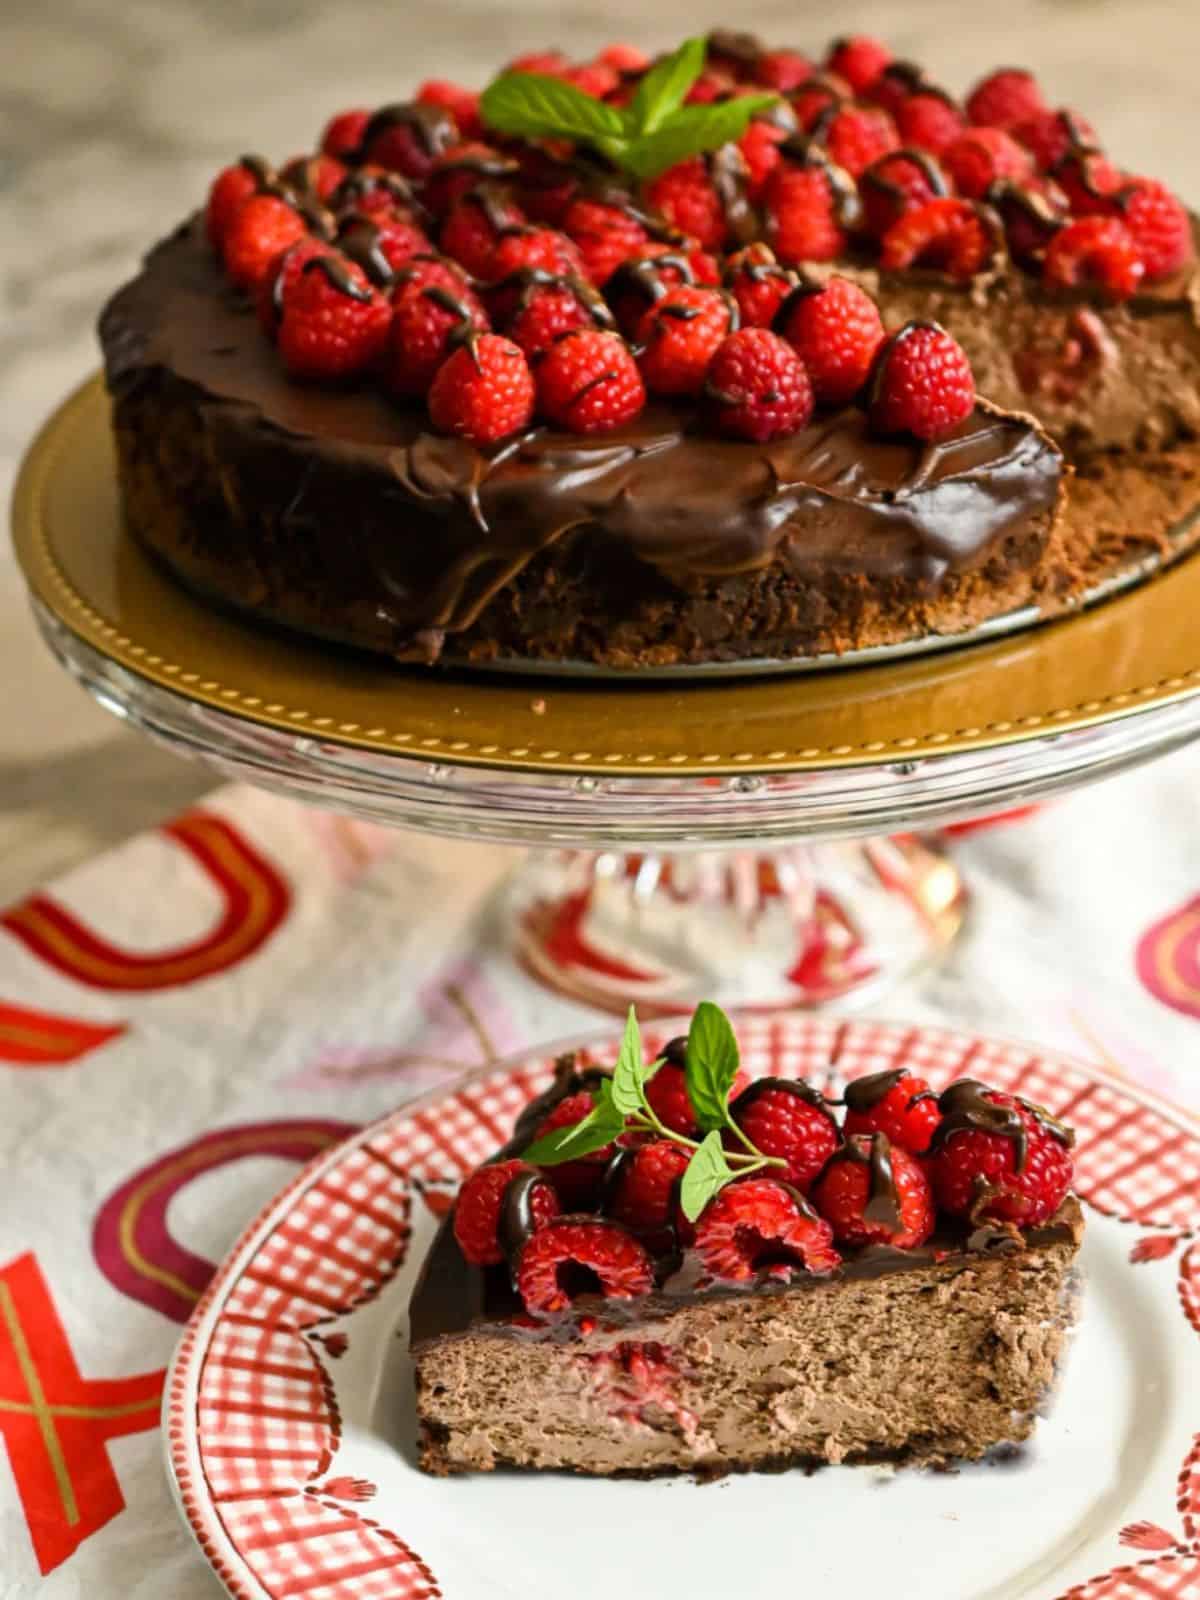 Luscious Chocolate Cheesecake studded with fresh Raspberries, a layer of chocolate ganache, and finally garnished with more fresh raspberries